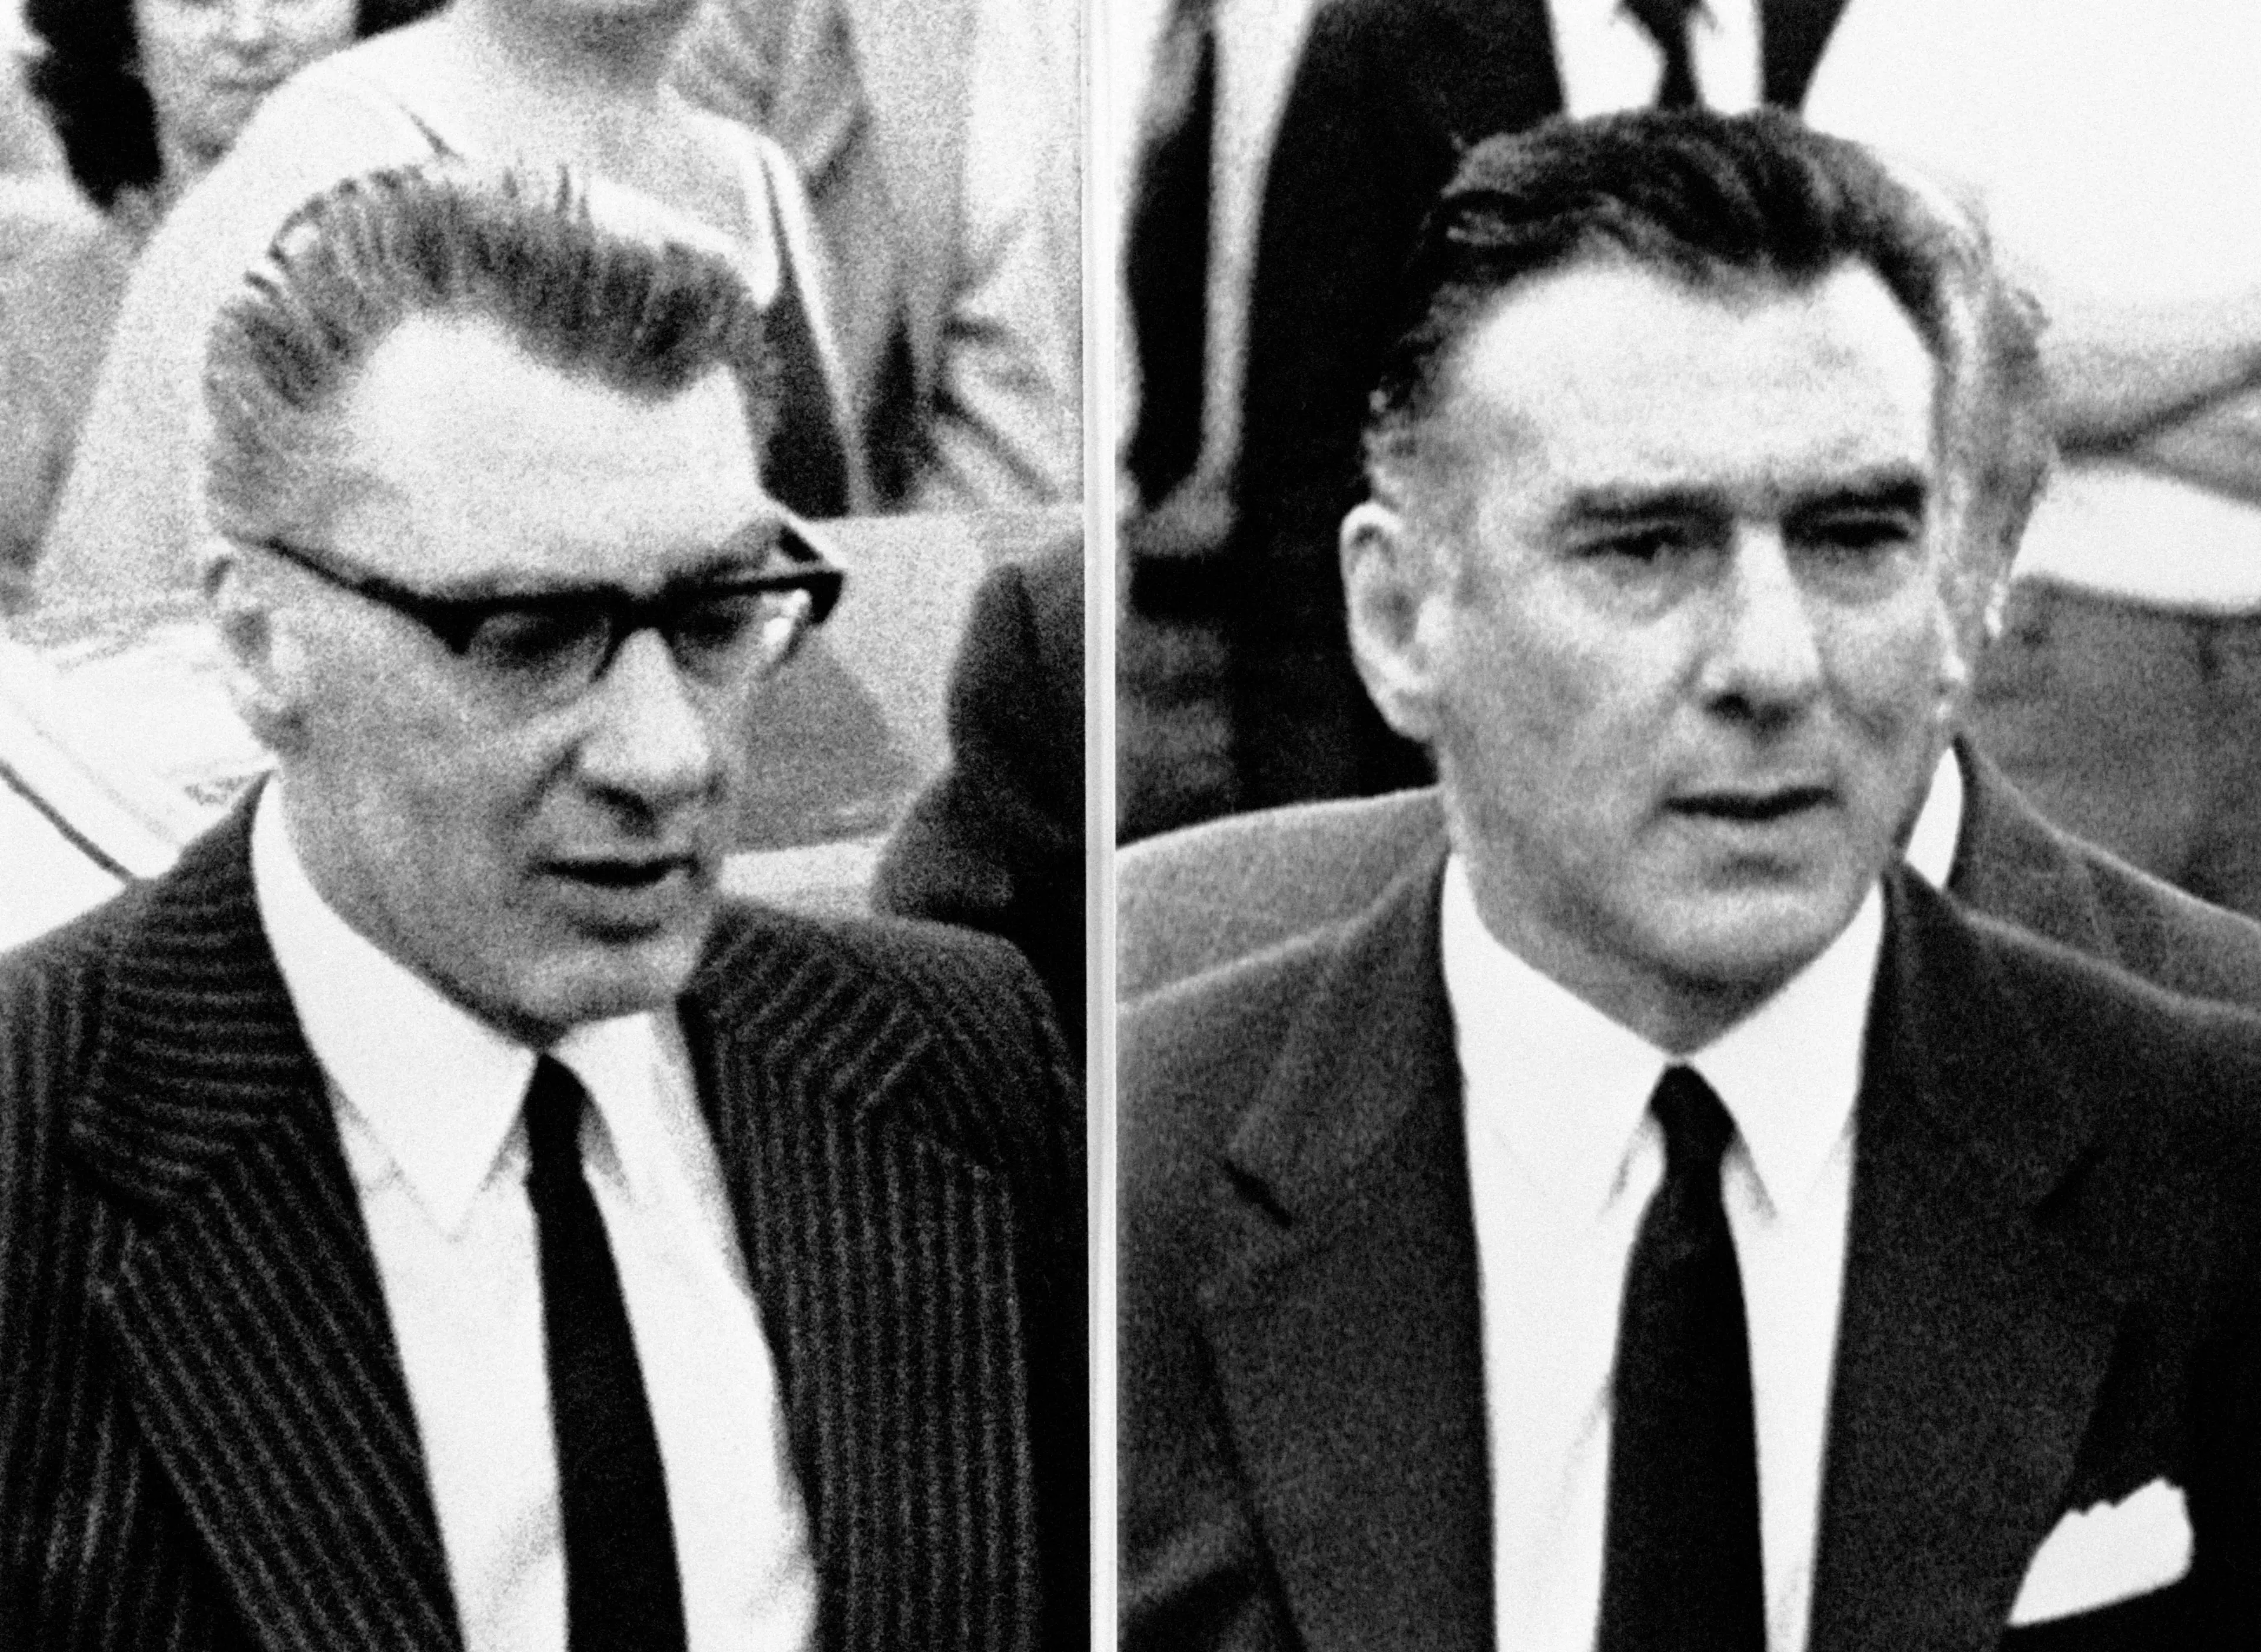 The Krays were notorious gangsters (